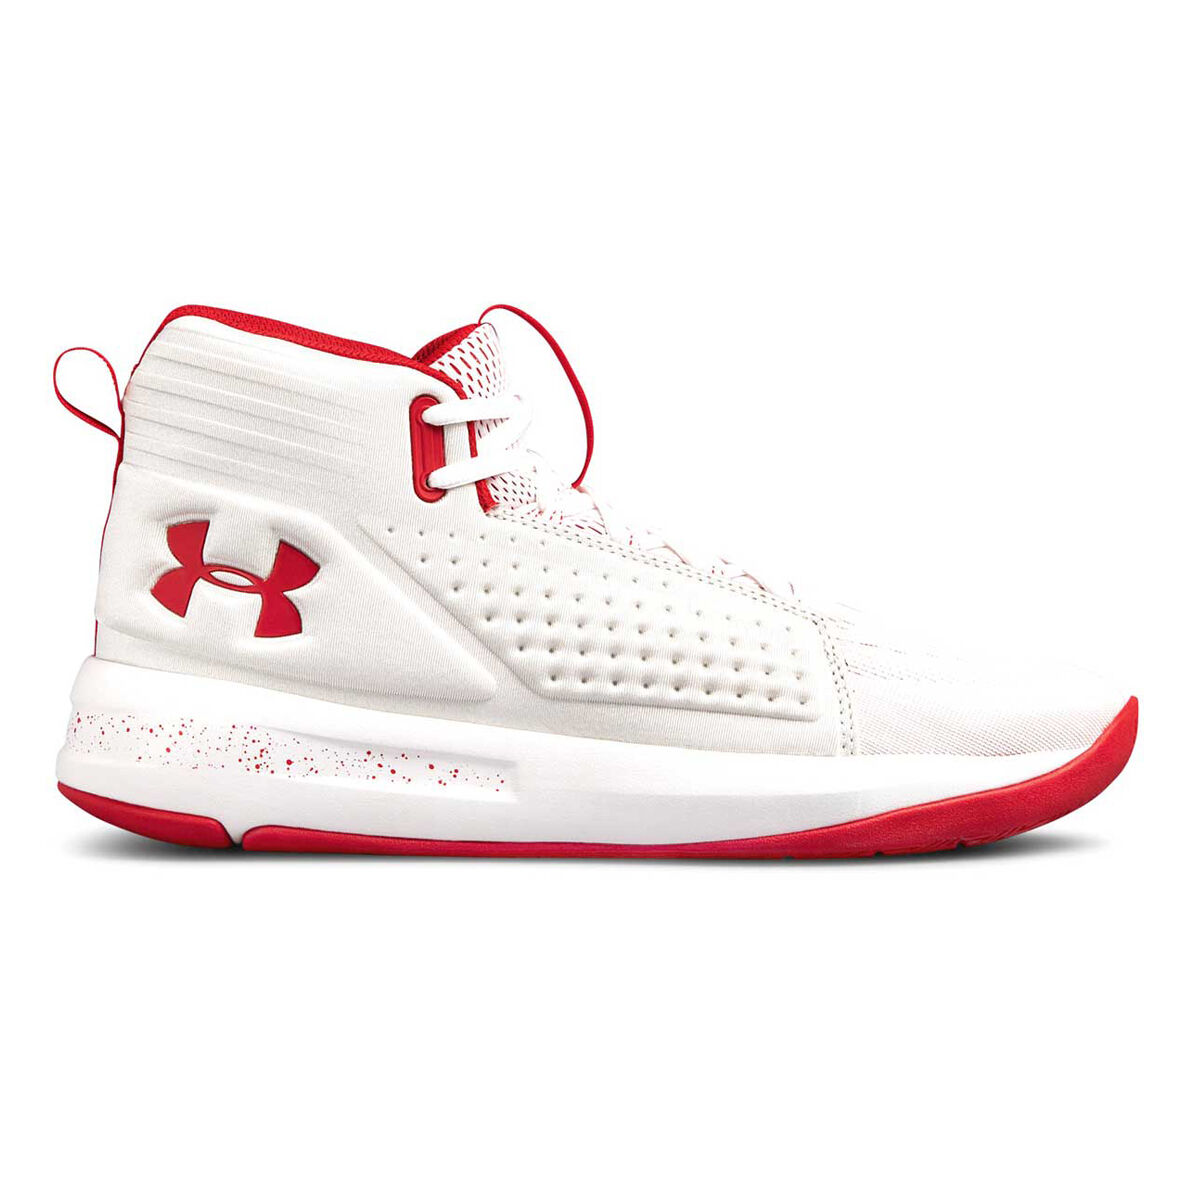 red and white under armour shoes